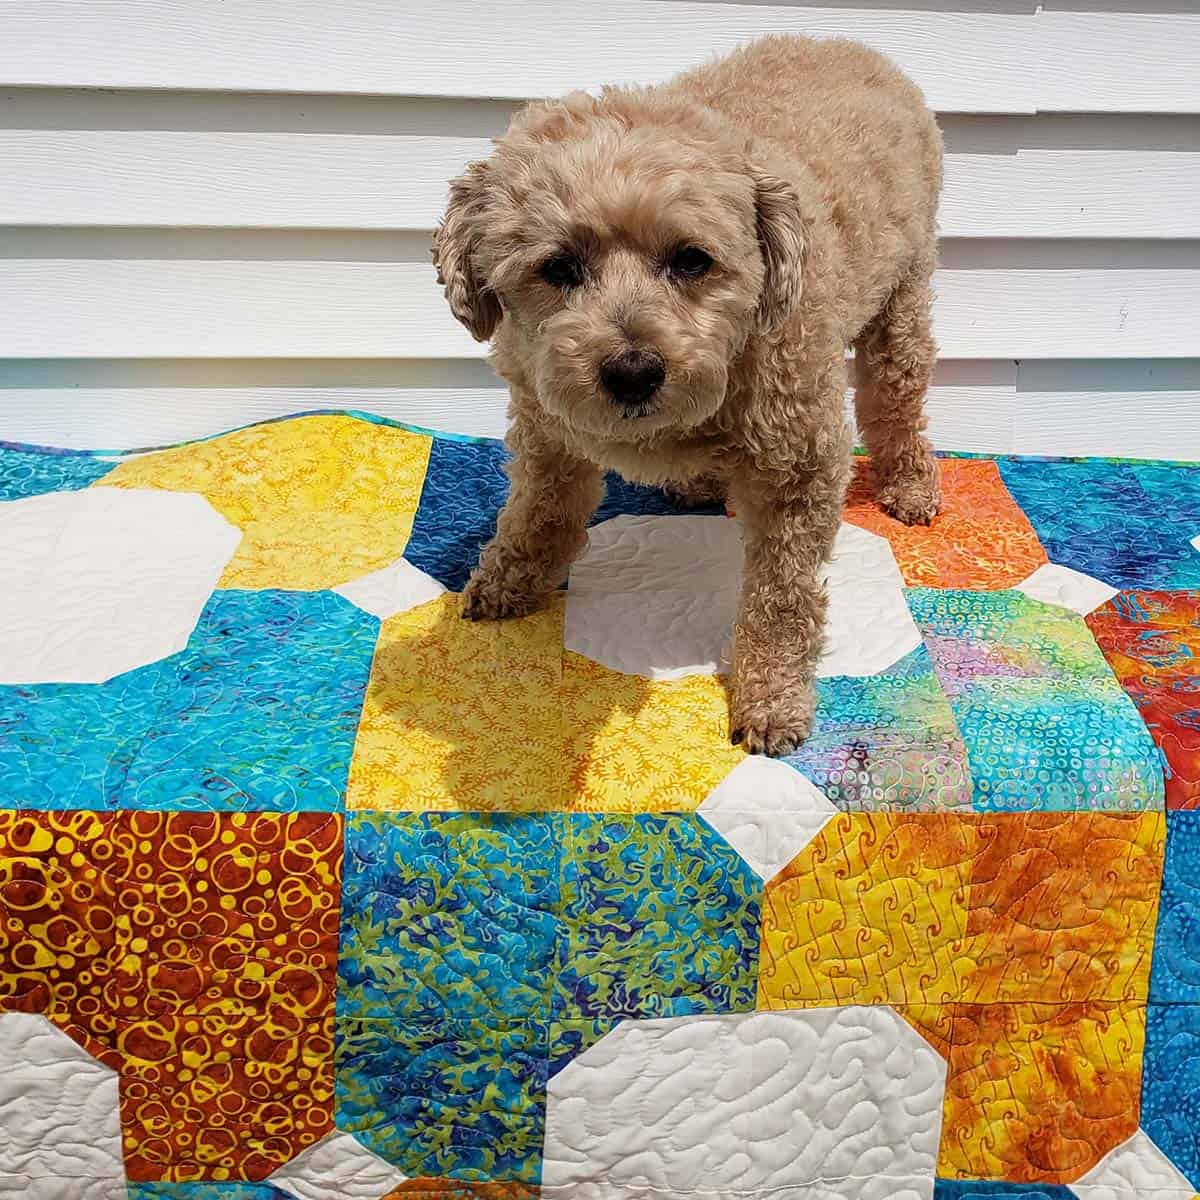 Not a happy dog on the Morning Glory baby quilt